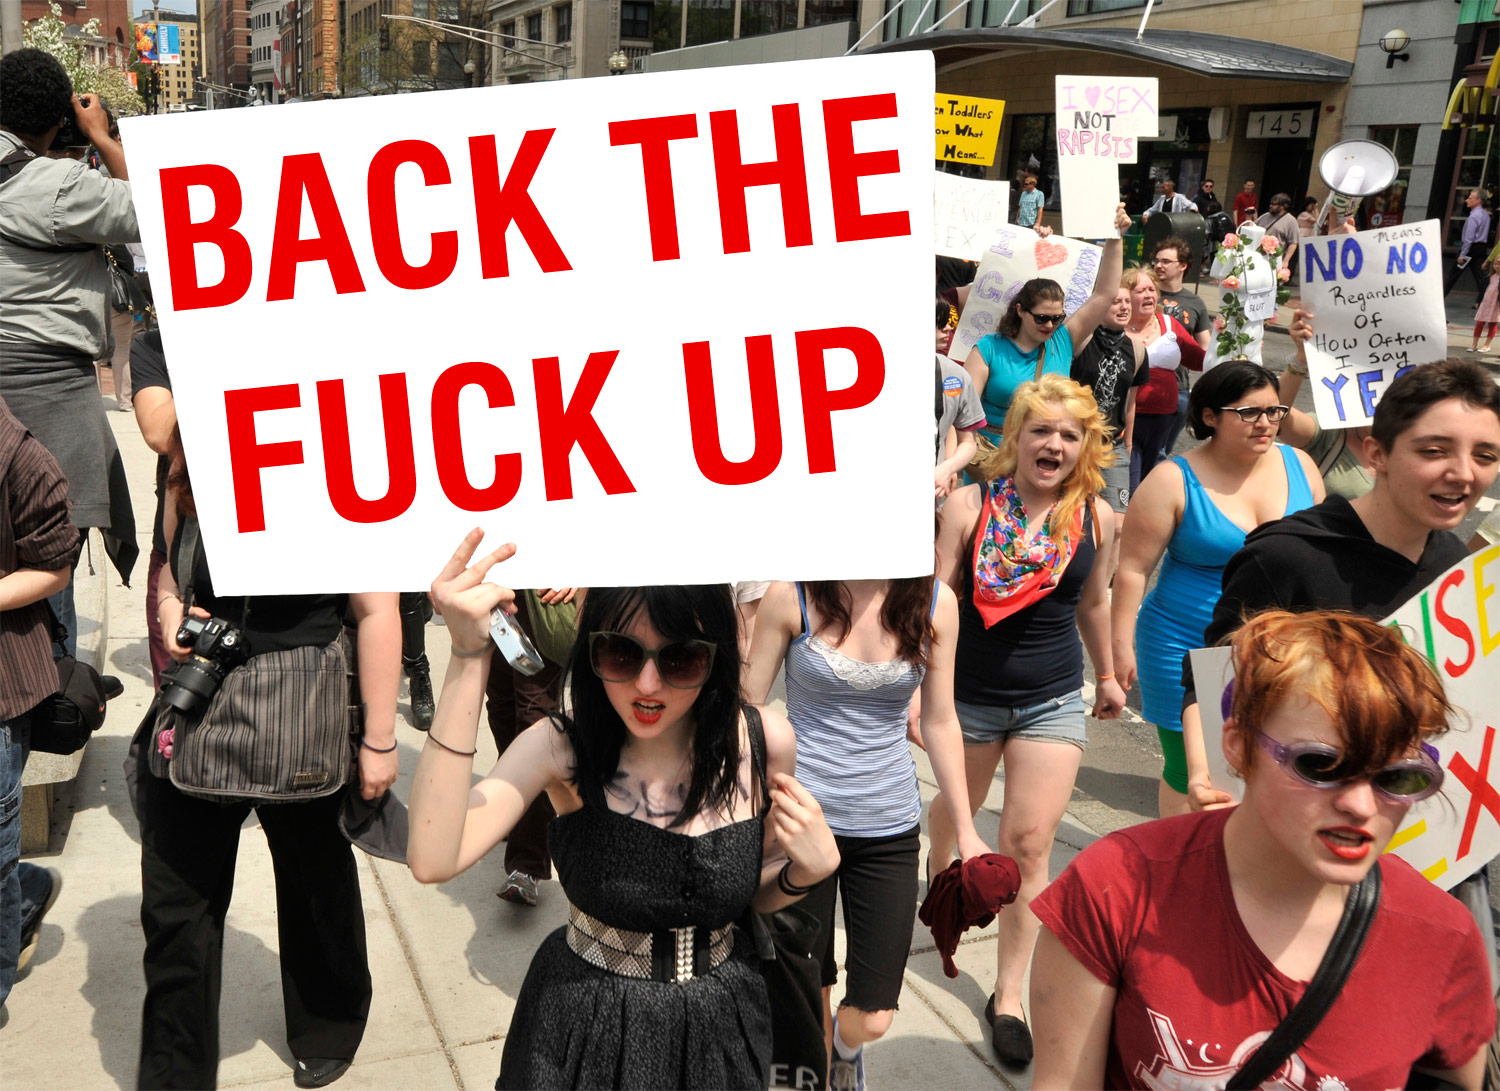 Back The Fuck Up: Protect Women’s Rights by Getting Out of the Way